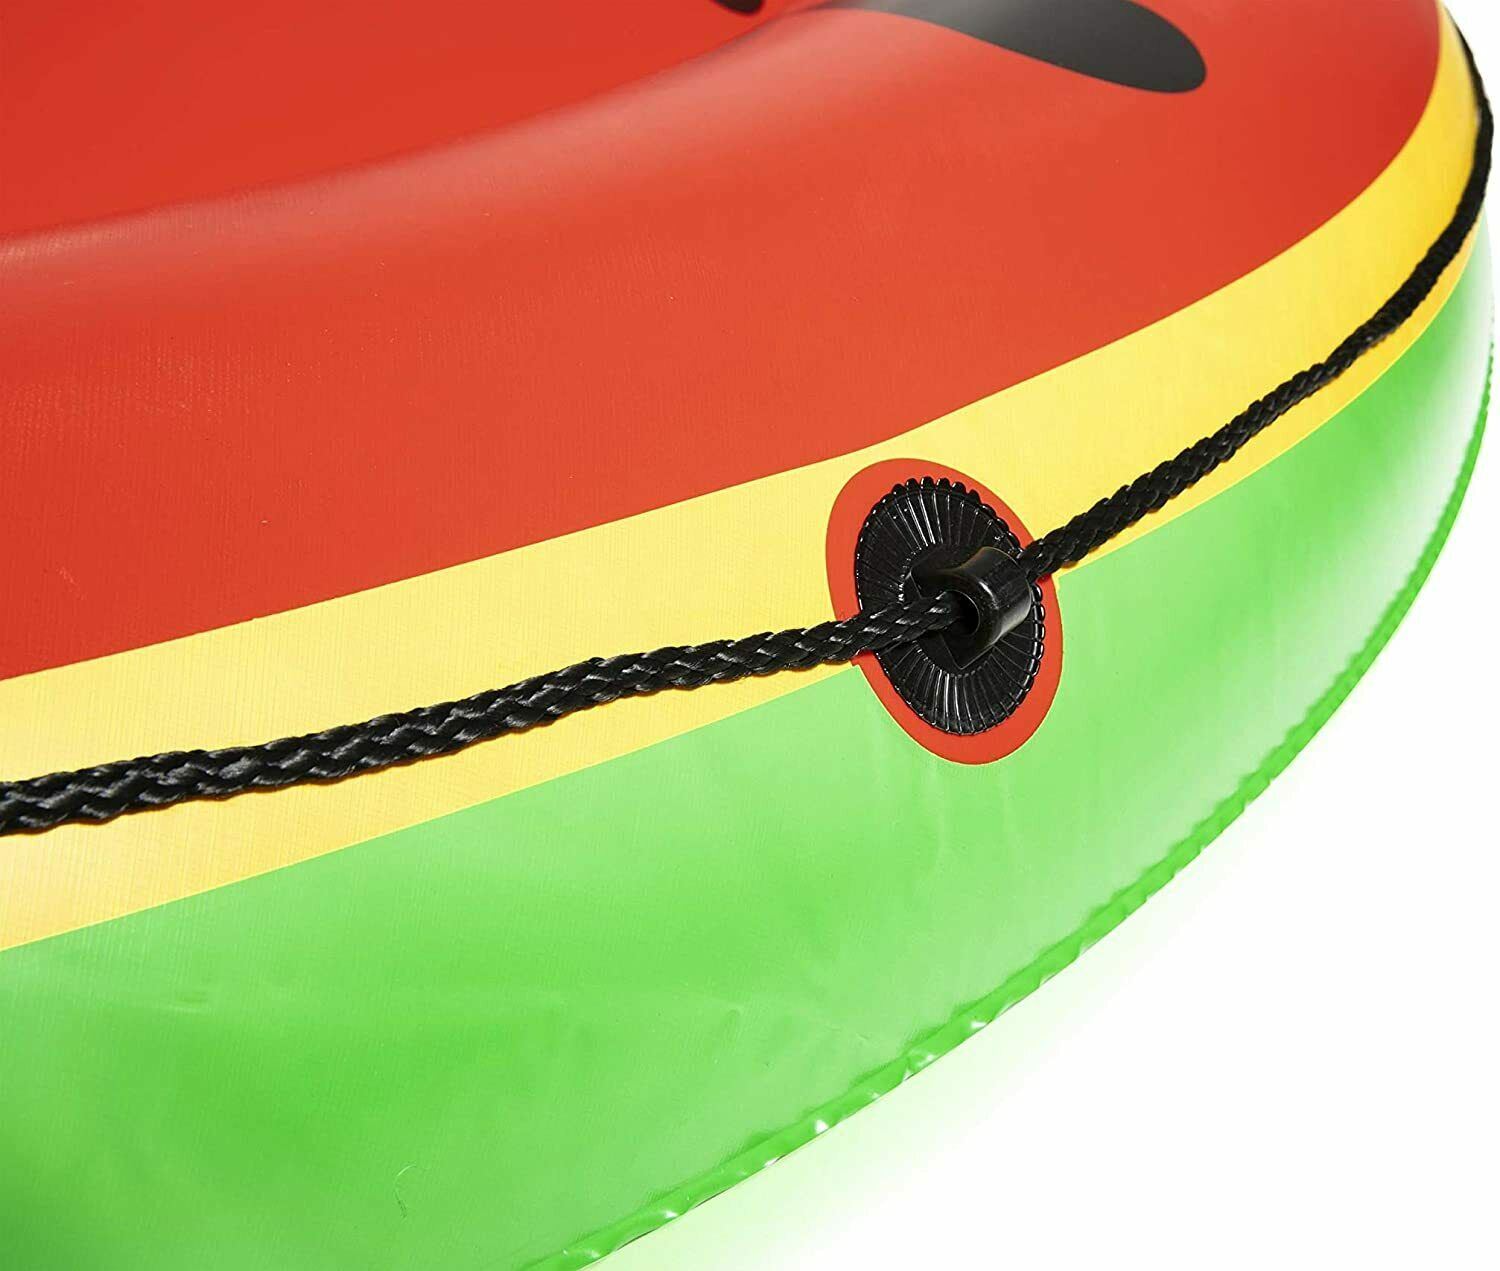 Watermelon Pool Float Inflatable Rubber by Geezy - UKBuyZone